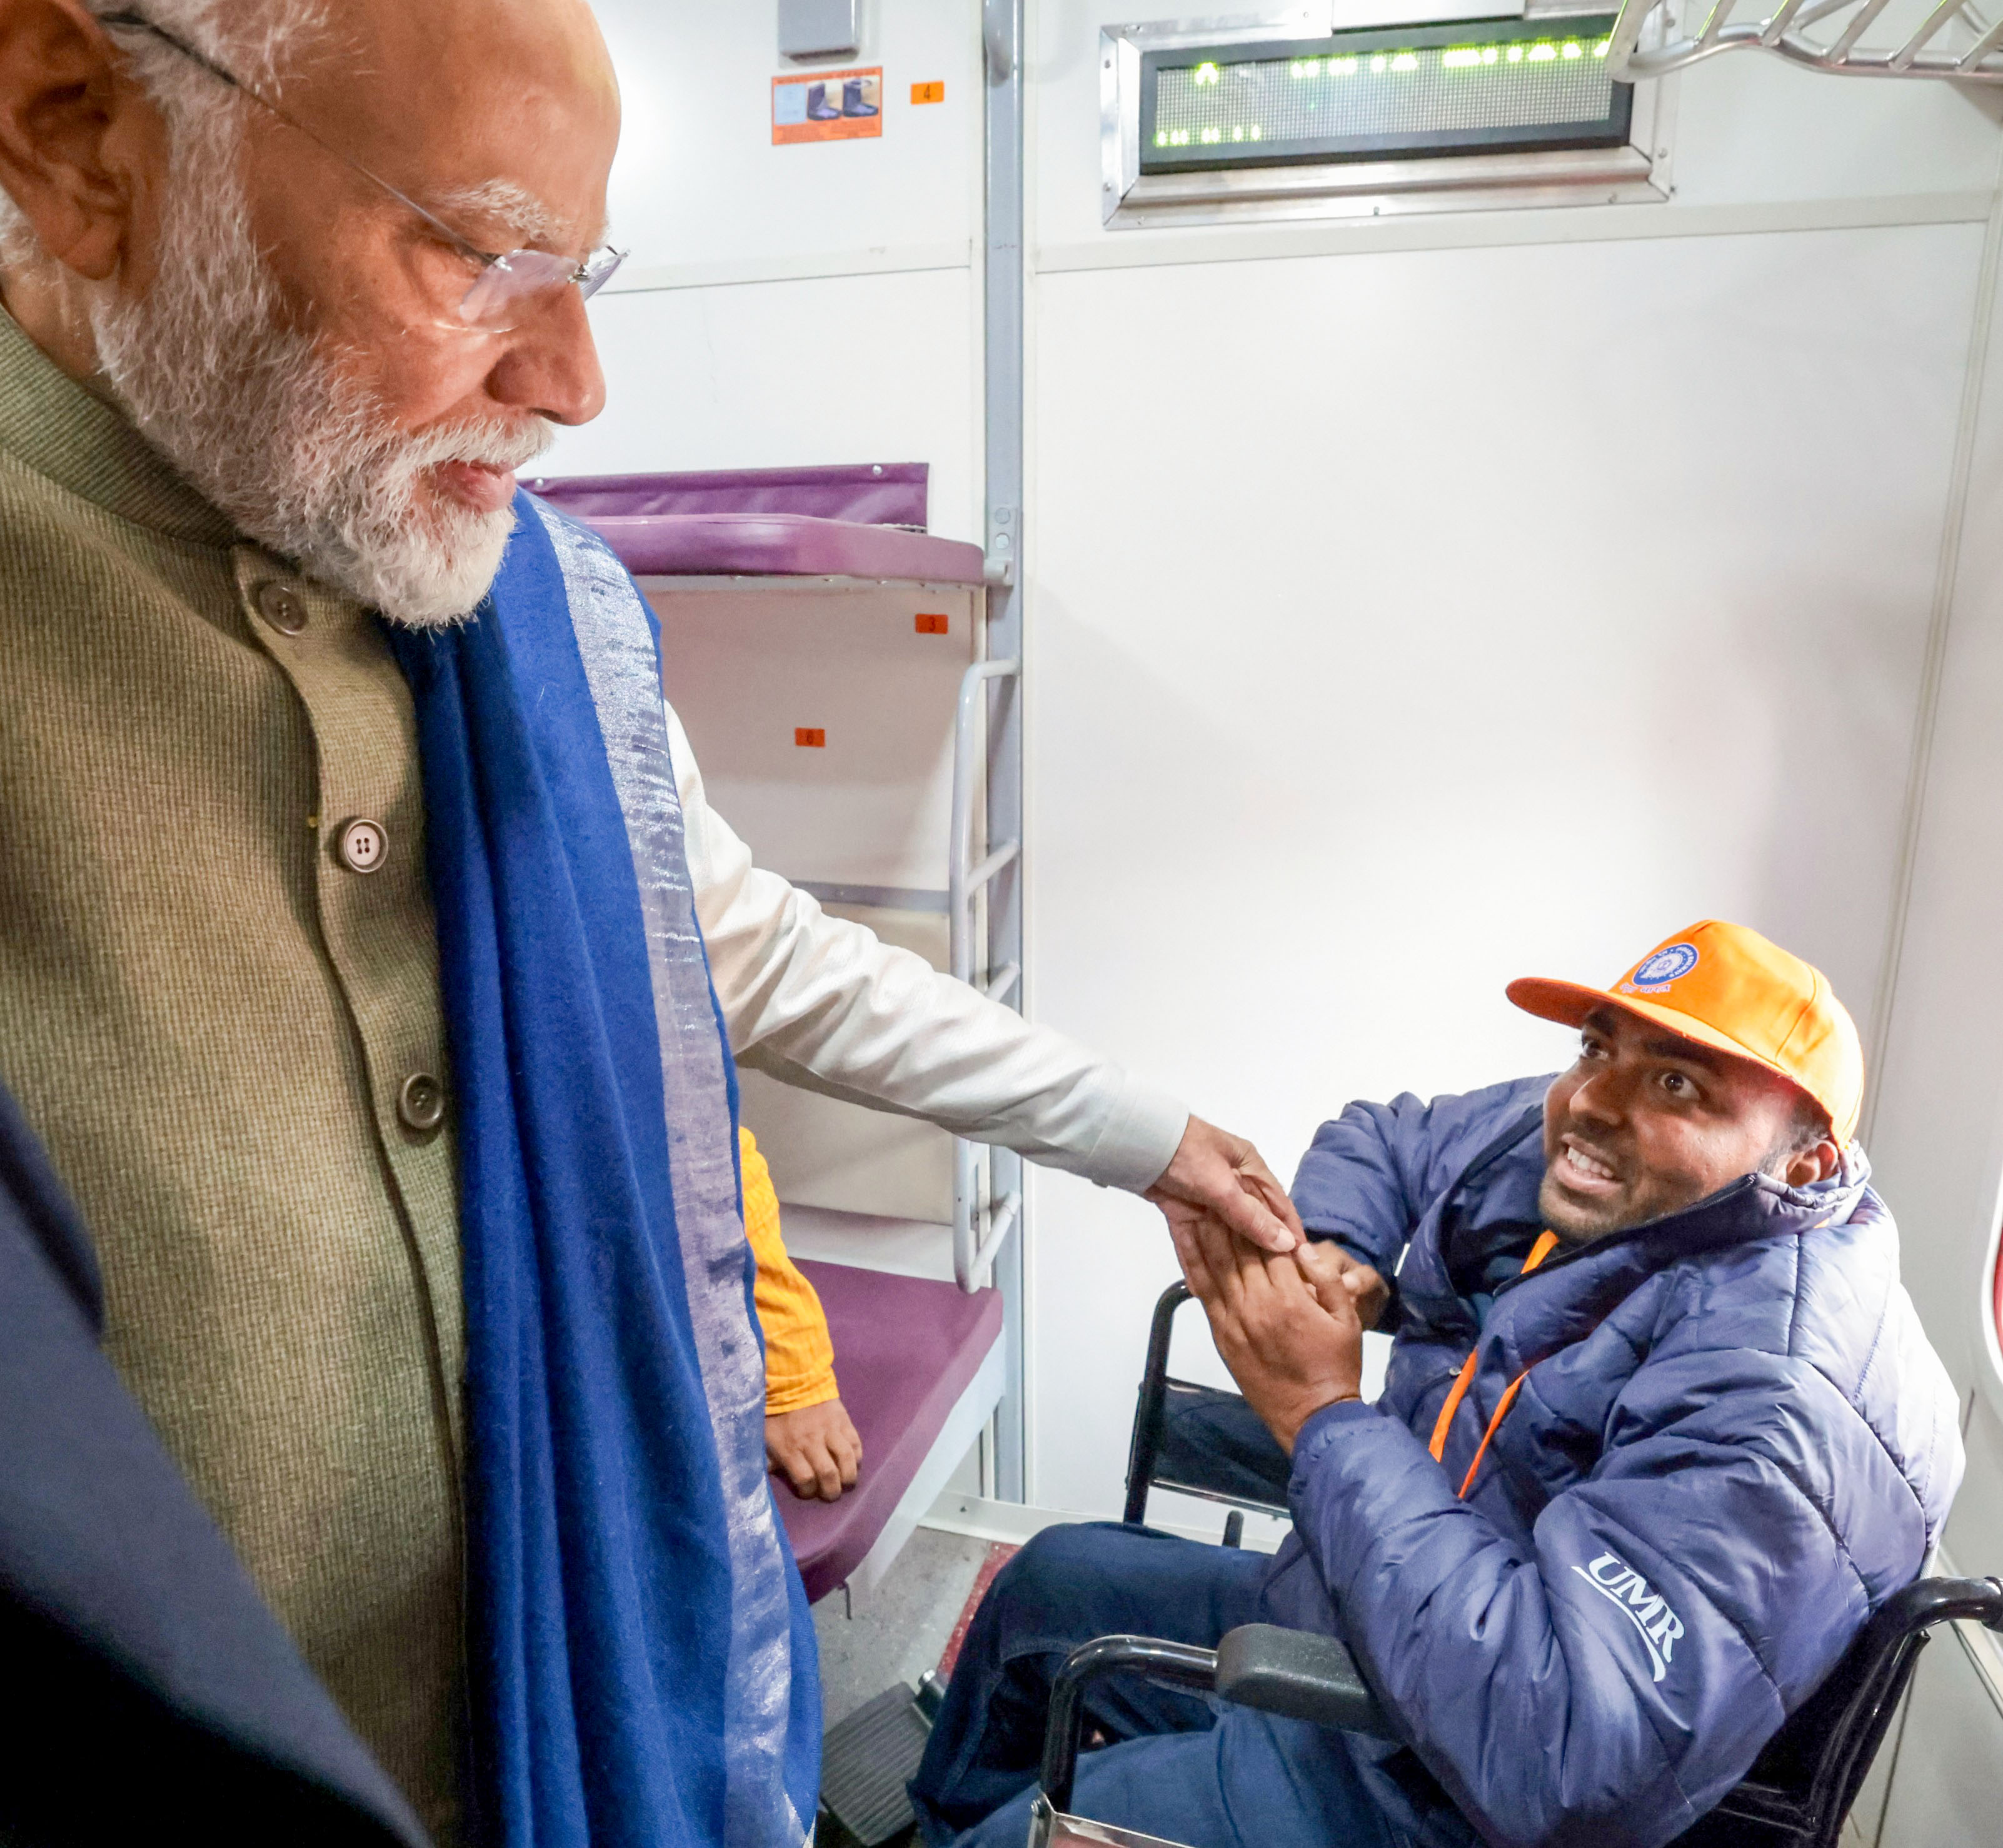 Prime Minister Narendra Modi interacts with a specially-abled passenger onboard the Amrit Bharat train after inaugurating it, in Ayodhya on Saturday.